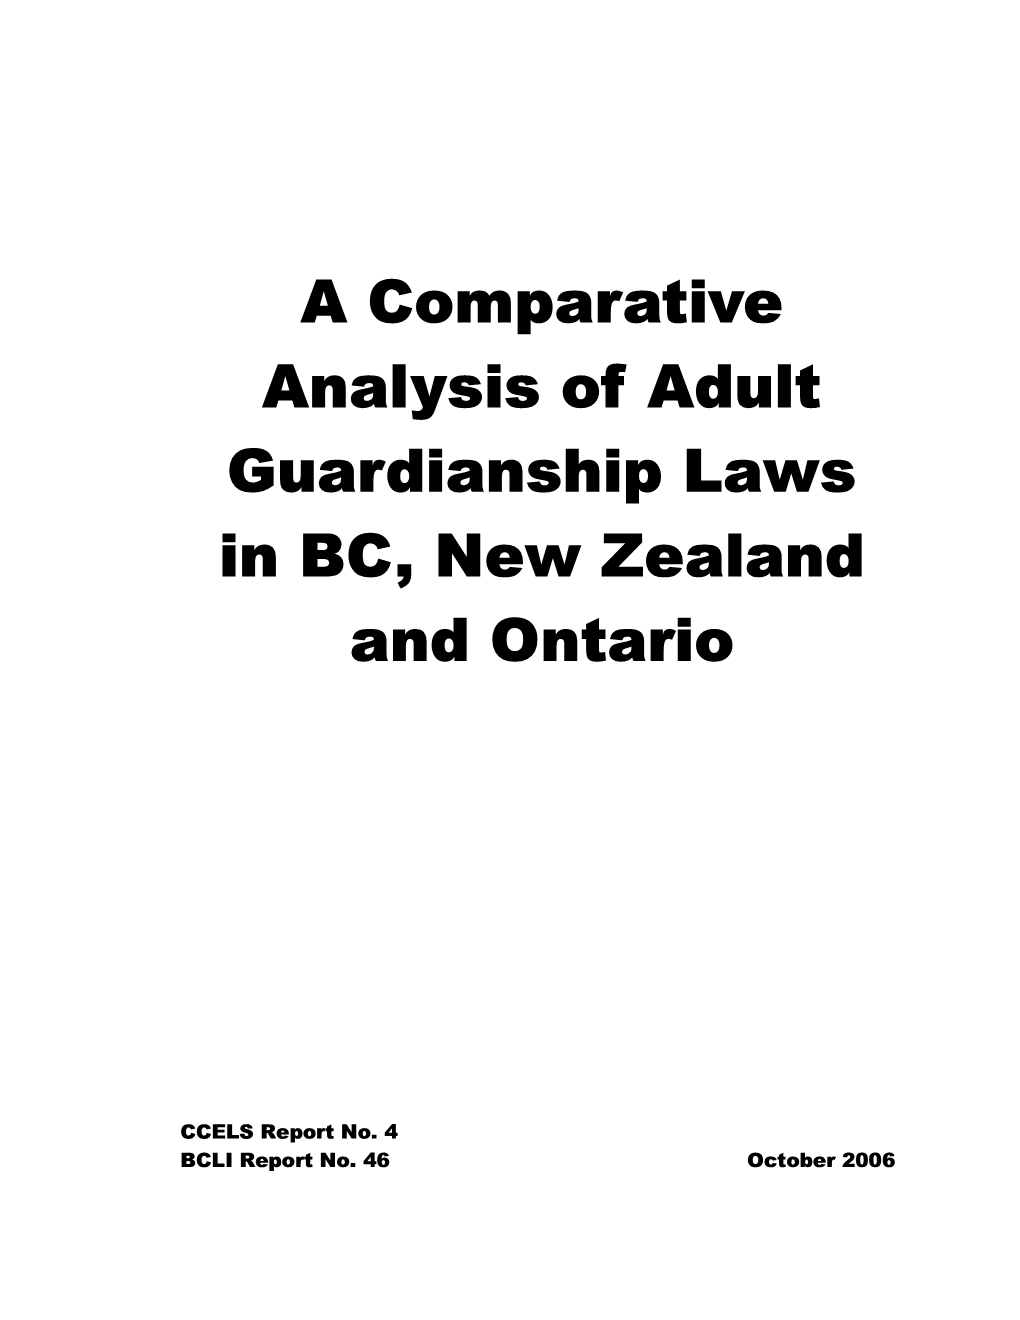 A Comparative Analysis of Adult Guardianship Laws in BC, New Zealand